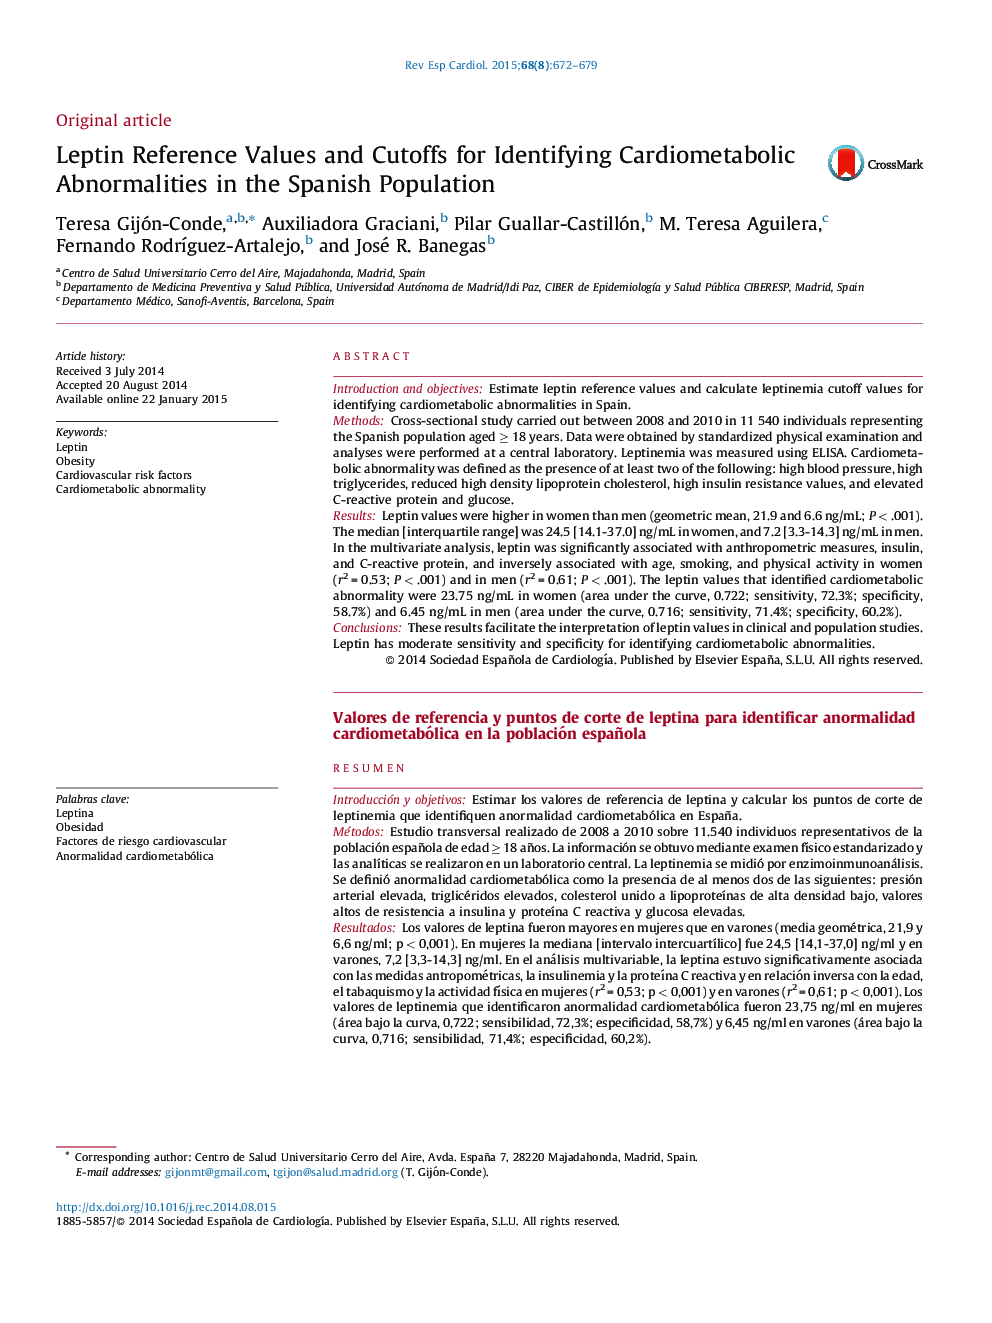 Leptin Reference Values and Cutoffs for Identifying Cardiometabolic Abnormalities in the Spanish Population